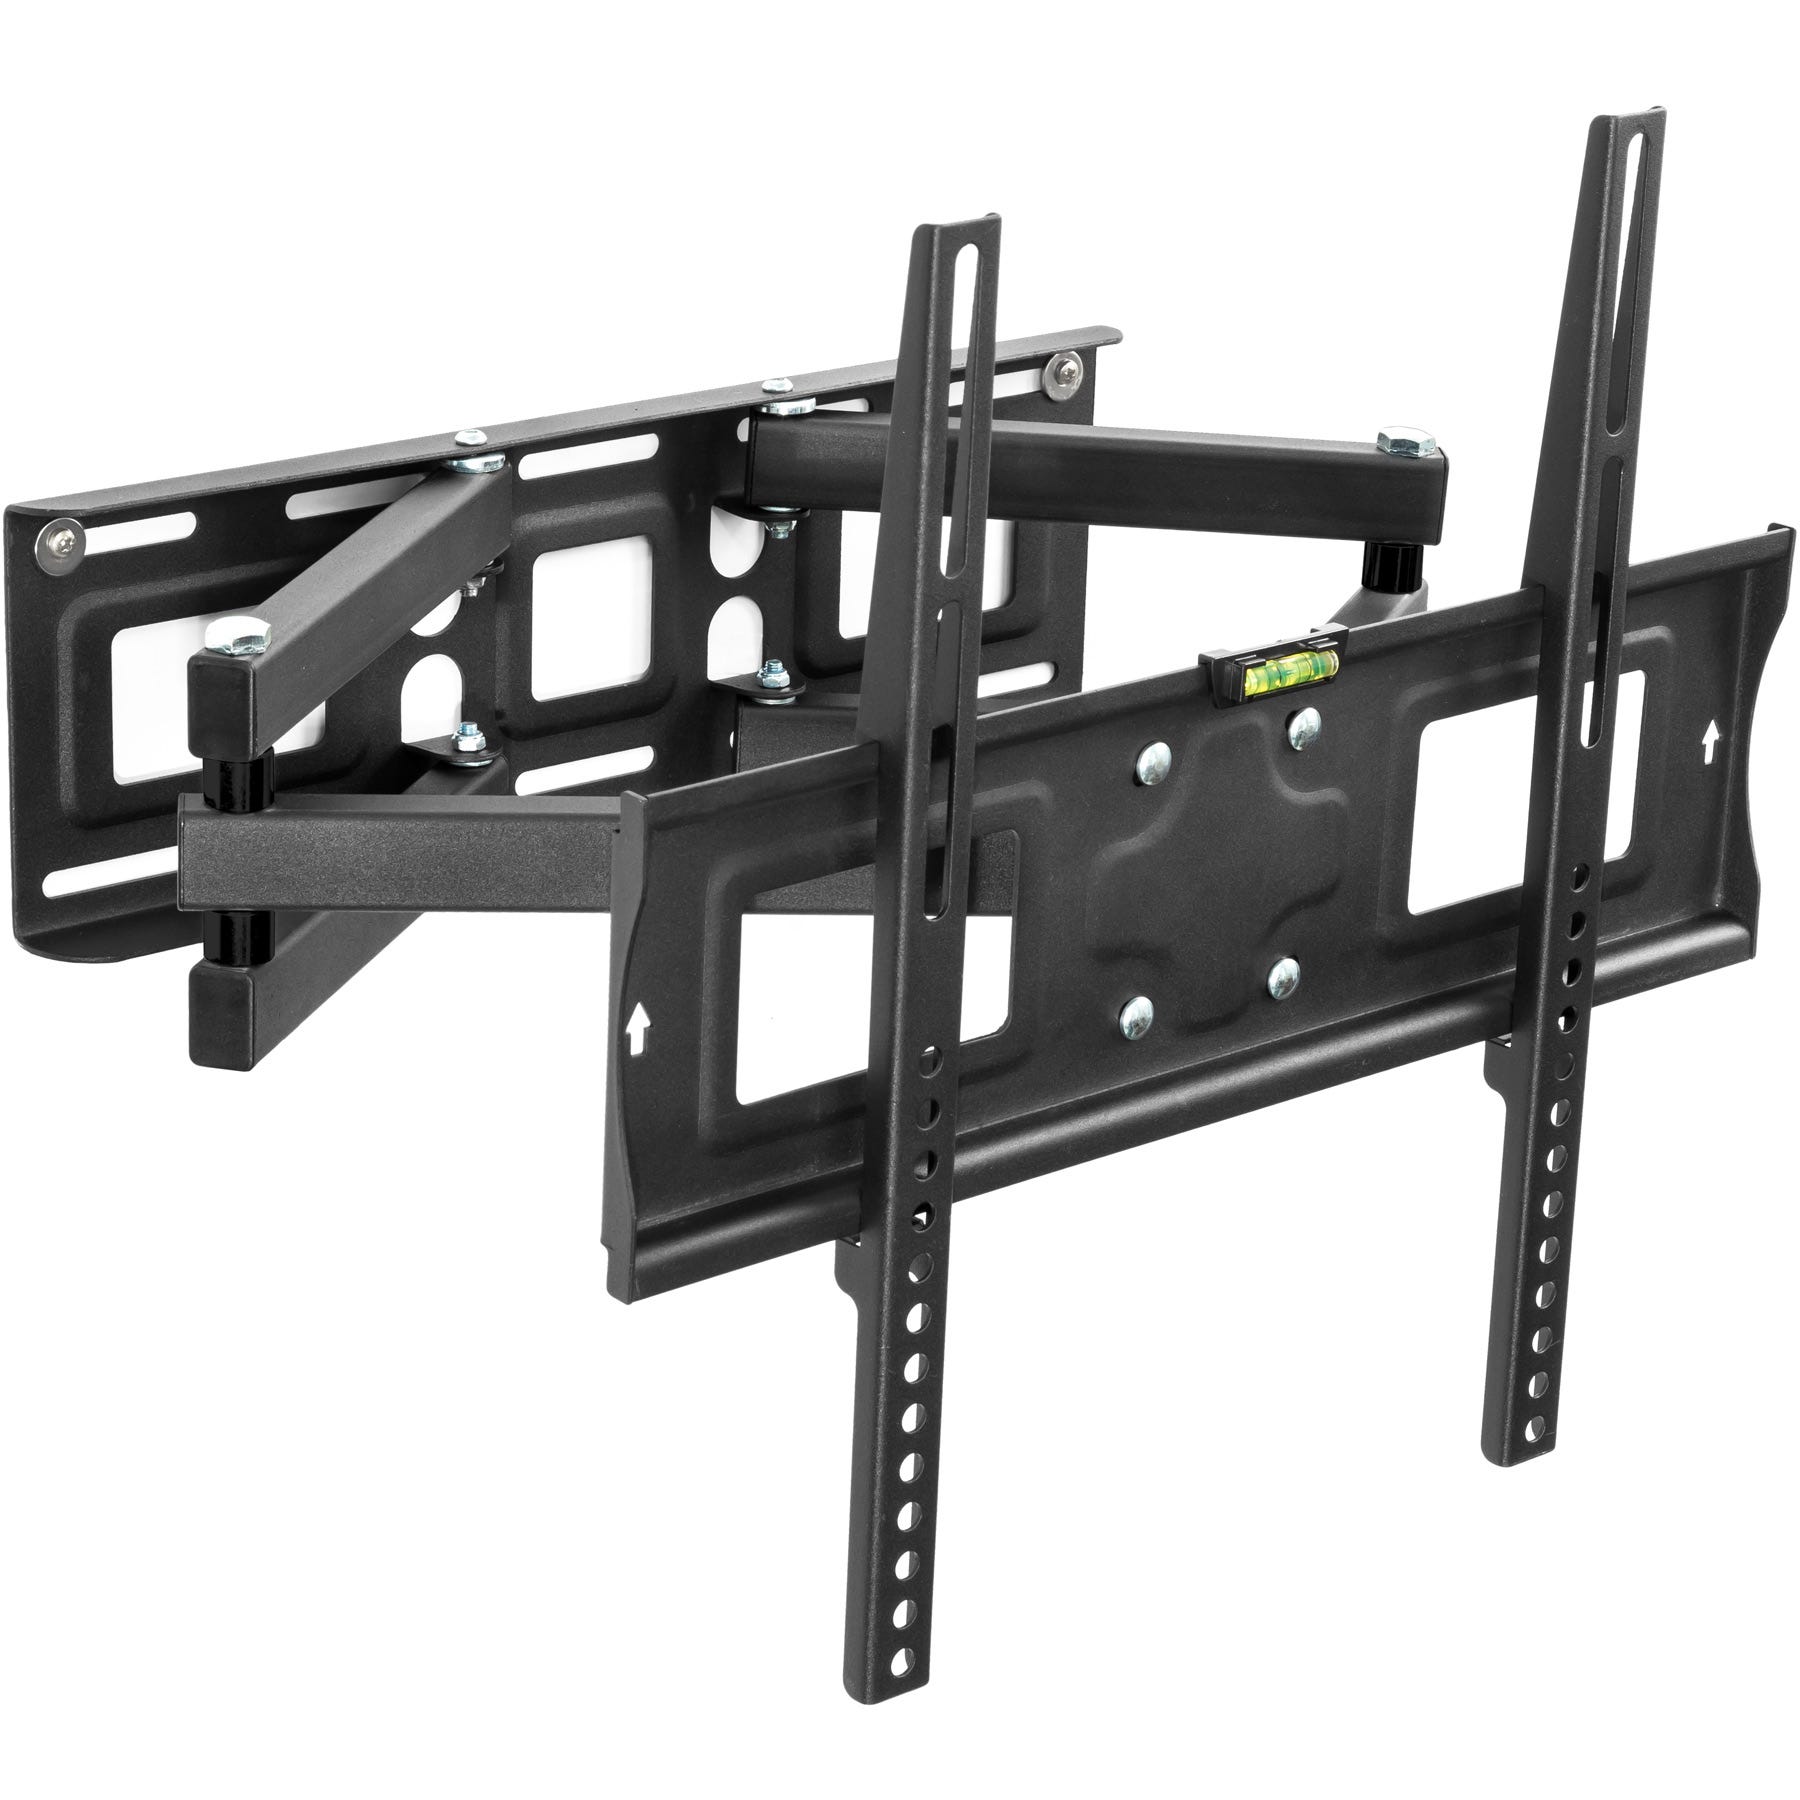 Tectake Support mural TV 32- 55 orientable et inclinable,VESA